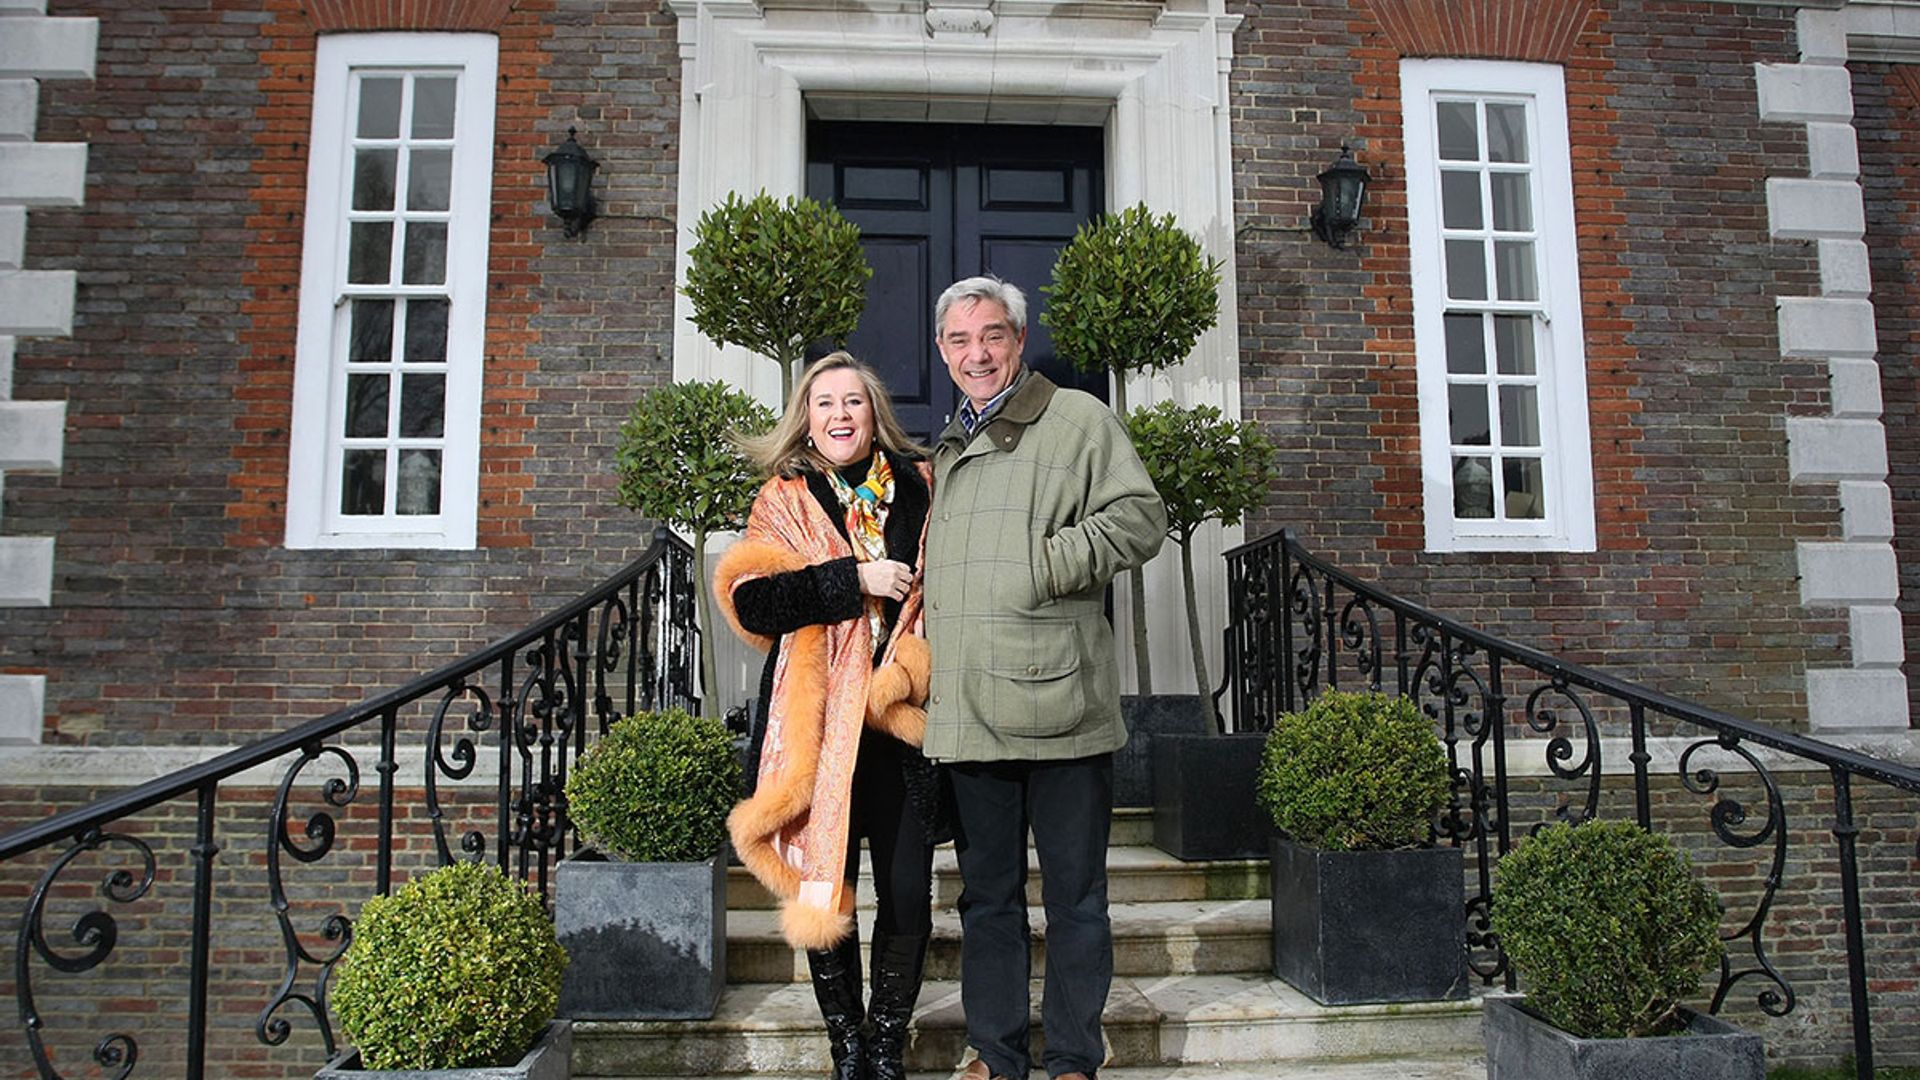 Gogglebox stars Steph and Dom are selling their luxury hotel which featured in the show